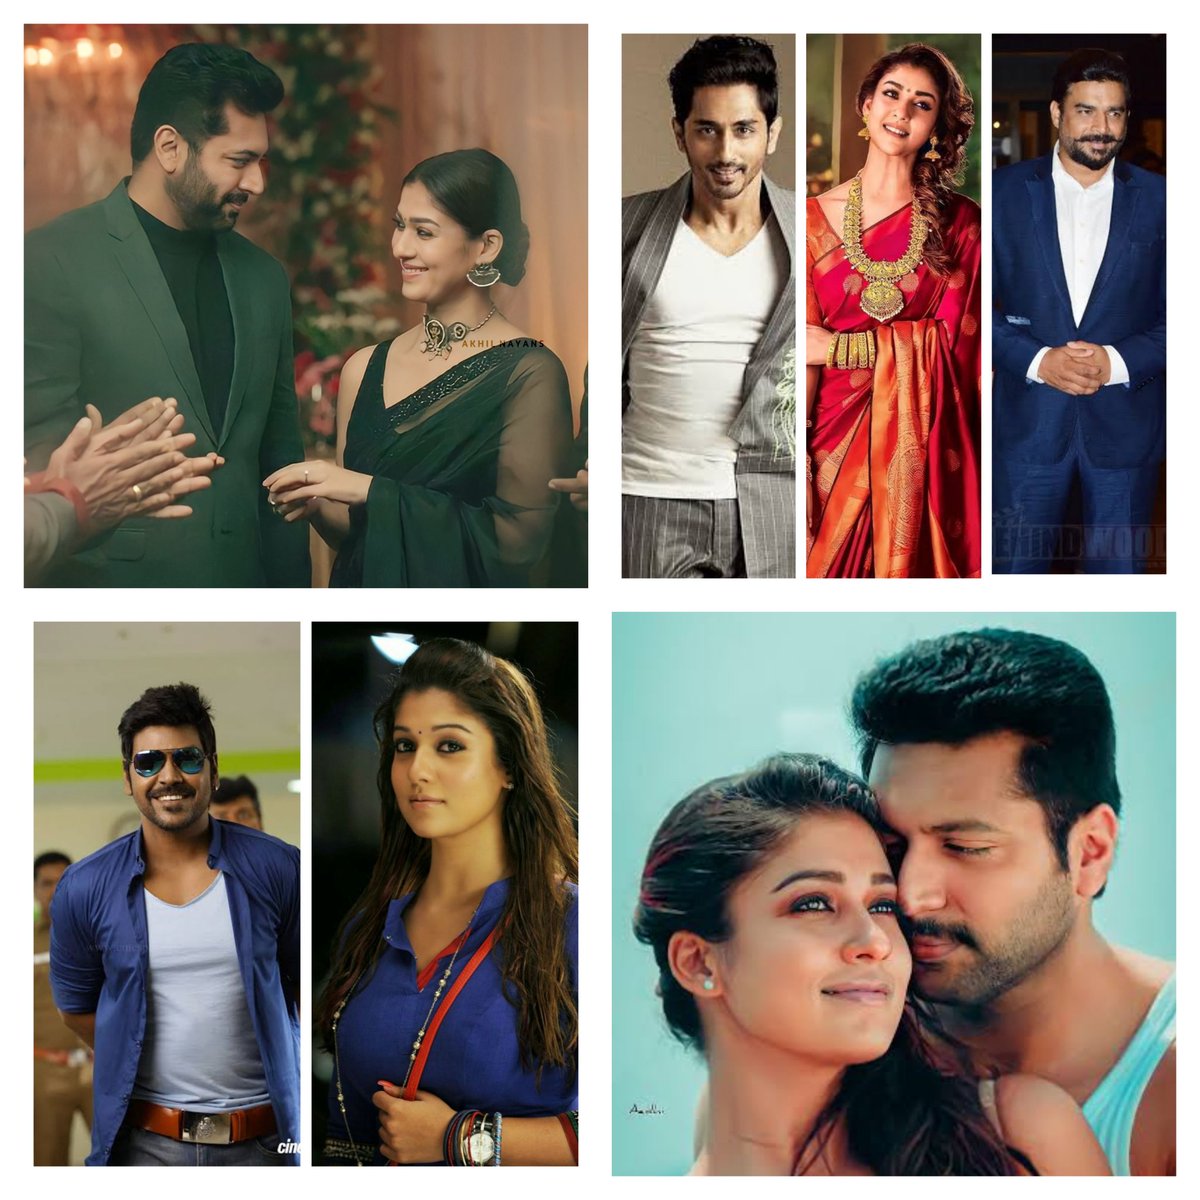 Nayanthara line up in Tamil alone other than her two solo movies....
1) #Iraivan with #JayamRavi 
2 #test with #maddy and #Siddharth
3. Dir Rathanakumar movie with #RaghavaLawrence 
4. #Thanioruvan2  with #JayamRavi 
 
#Nayanthara market is not slowing down any day for now